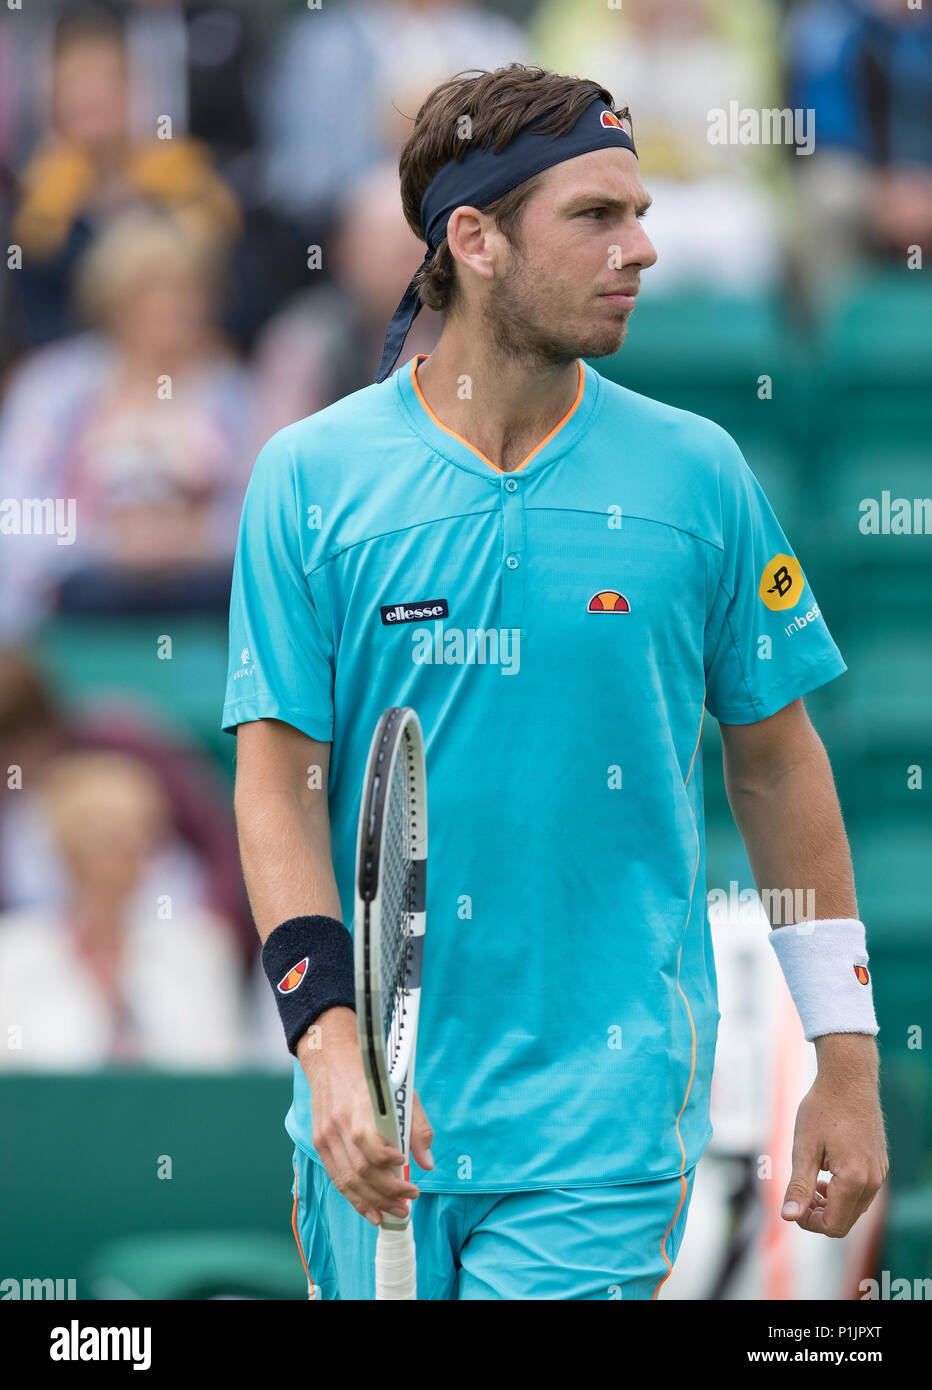 Cameron Norrie Tennis - Cameron Norrie v Tatsuma Ito - Nature Valley Open 2018 EDITORIAL ONLY Stock Photo